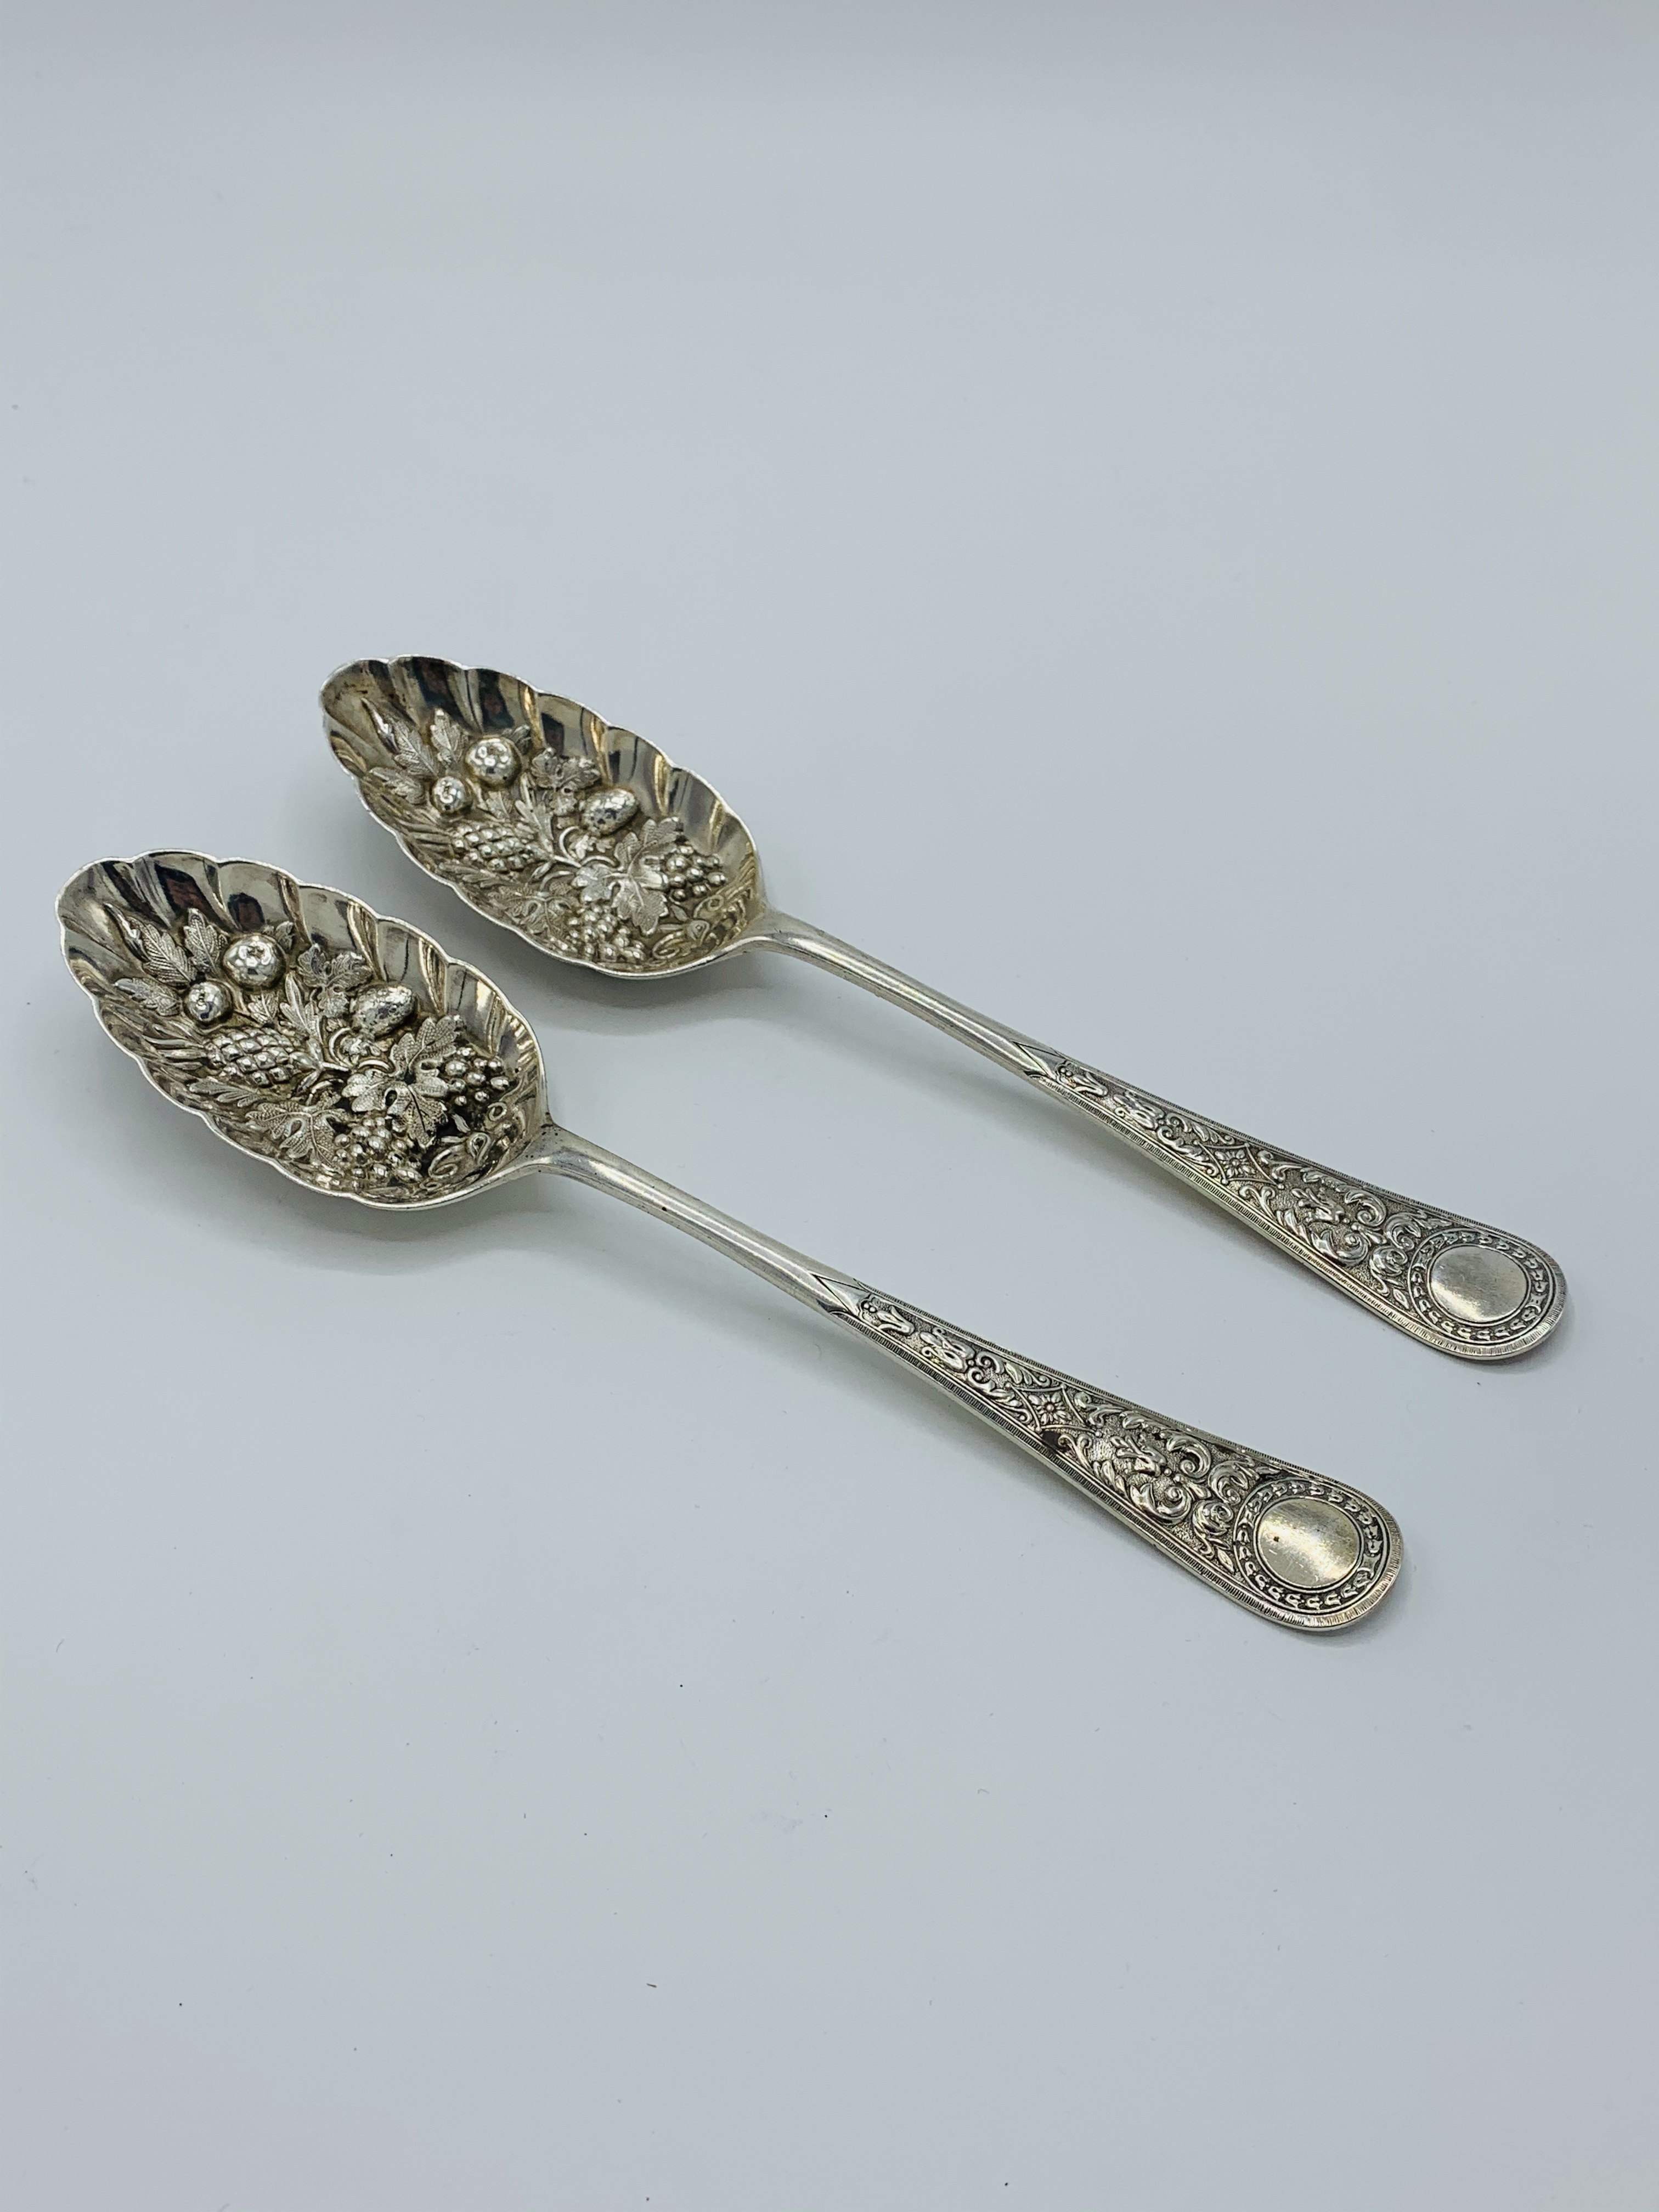 2 silver berry spoons by Walker & Hall.